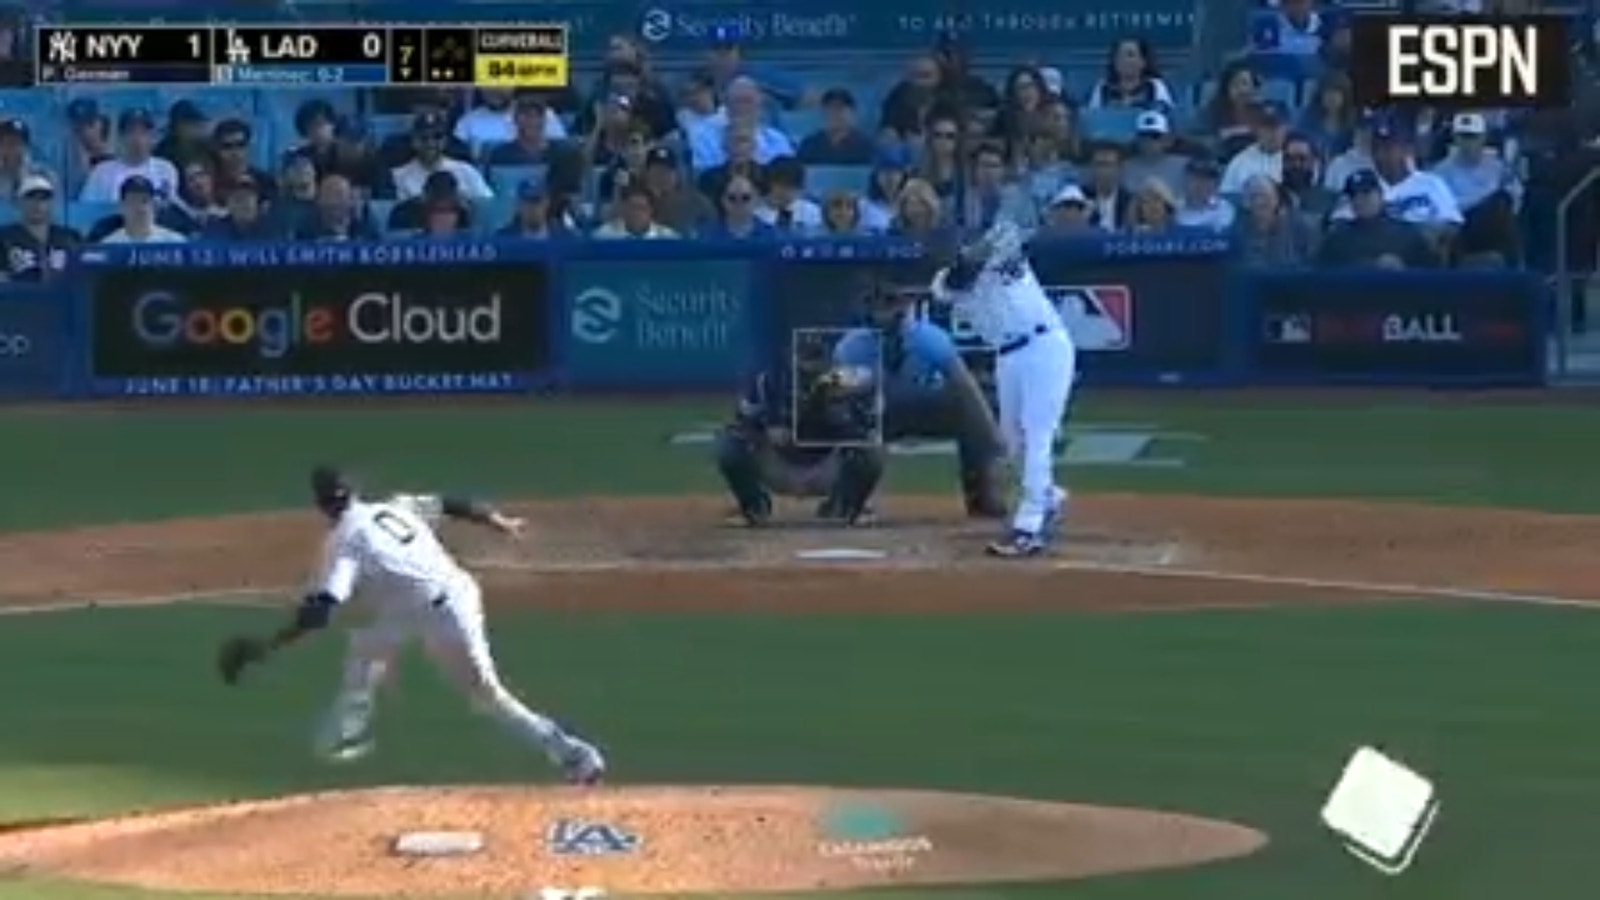 Dodgers' J.D. Martinez cranks game-tying solo homer against the Yankees